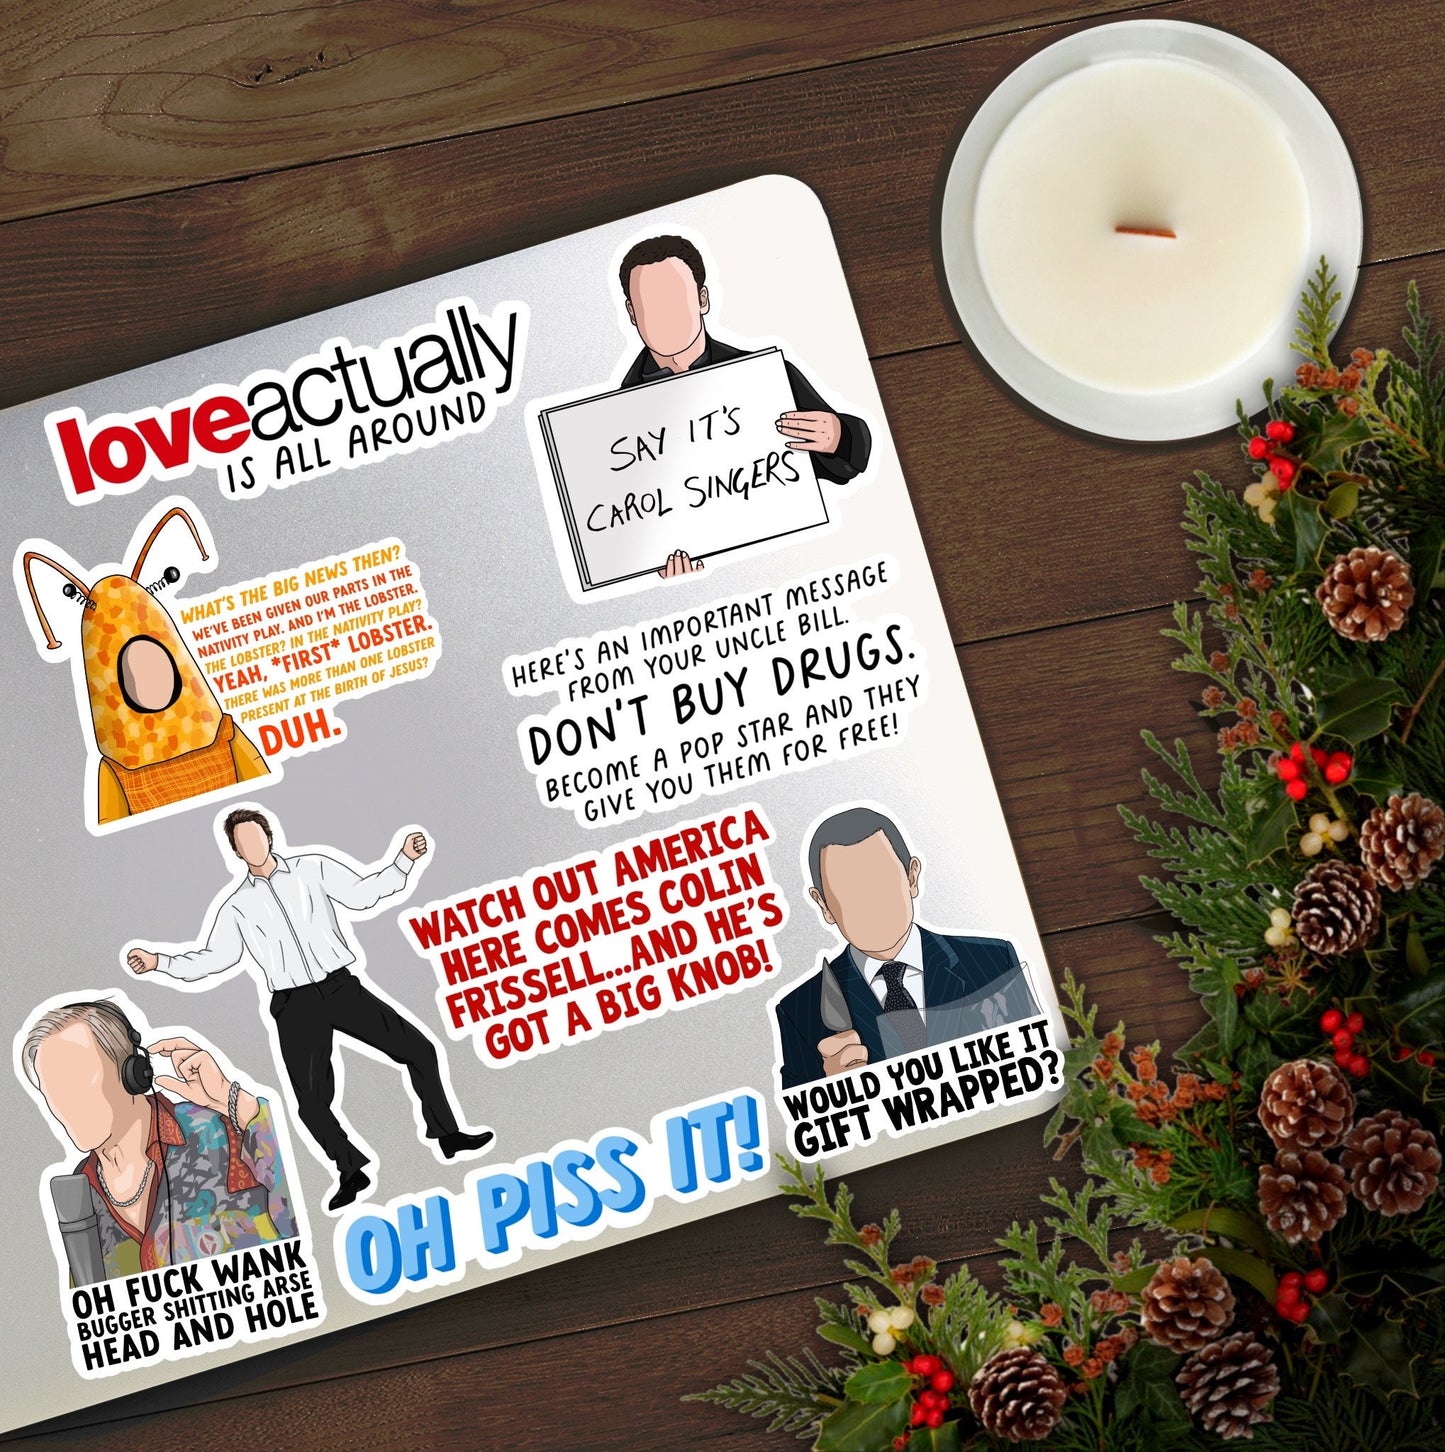 Don't Buy Drugs, Become a Pop Star and They Give You Them For Free  | Love Actually Stickers